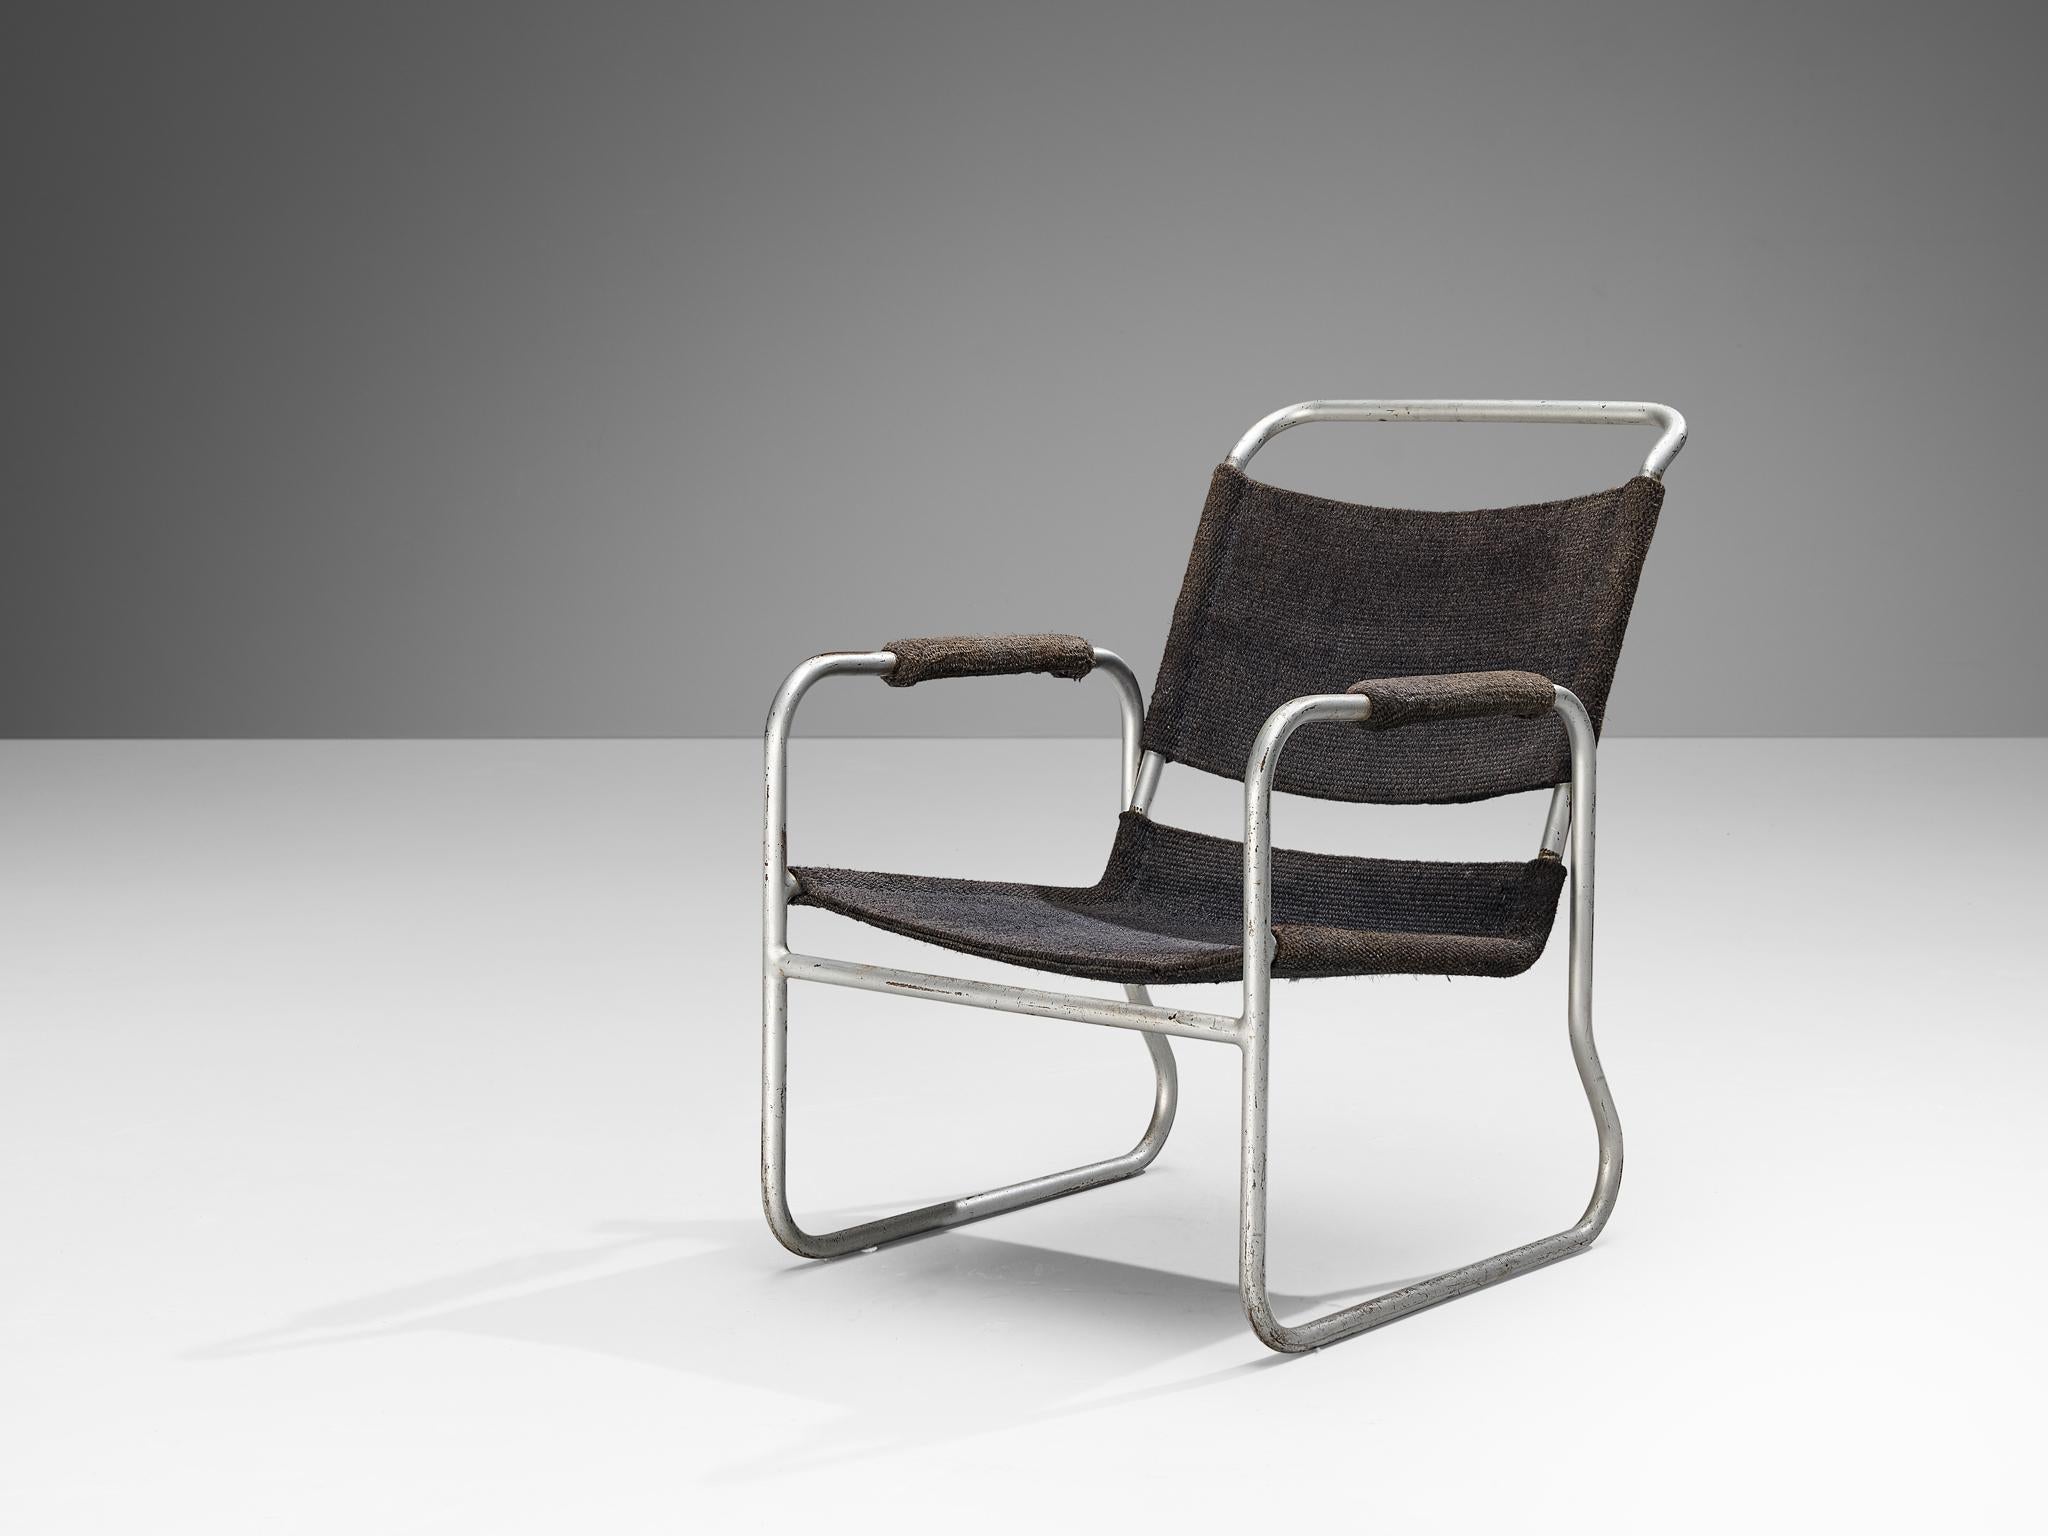 Bas Van Pelt for EMS/My Home, armchair, tubular metal and sisal armchair, the Netherlands, 1920s.

This classic armchair is designed by Bas Van Pelt and is executed with a sisal back and seat. The armrests too are covered with this natural